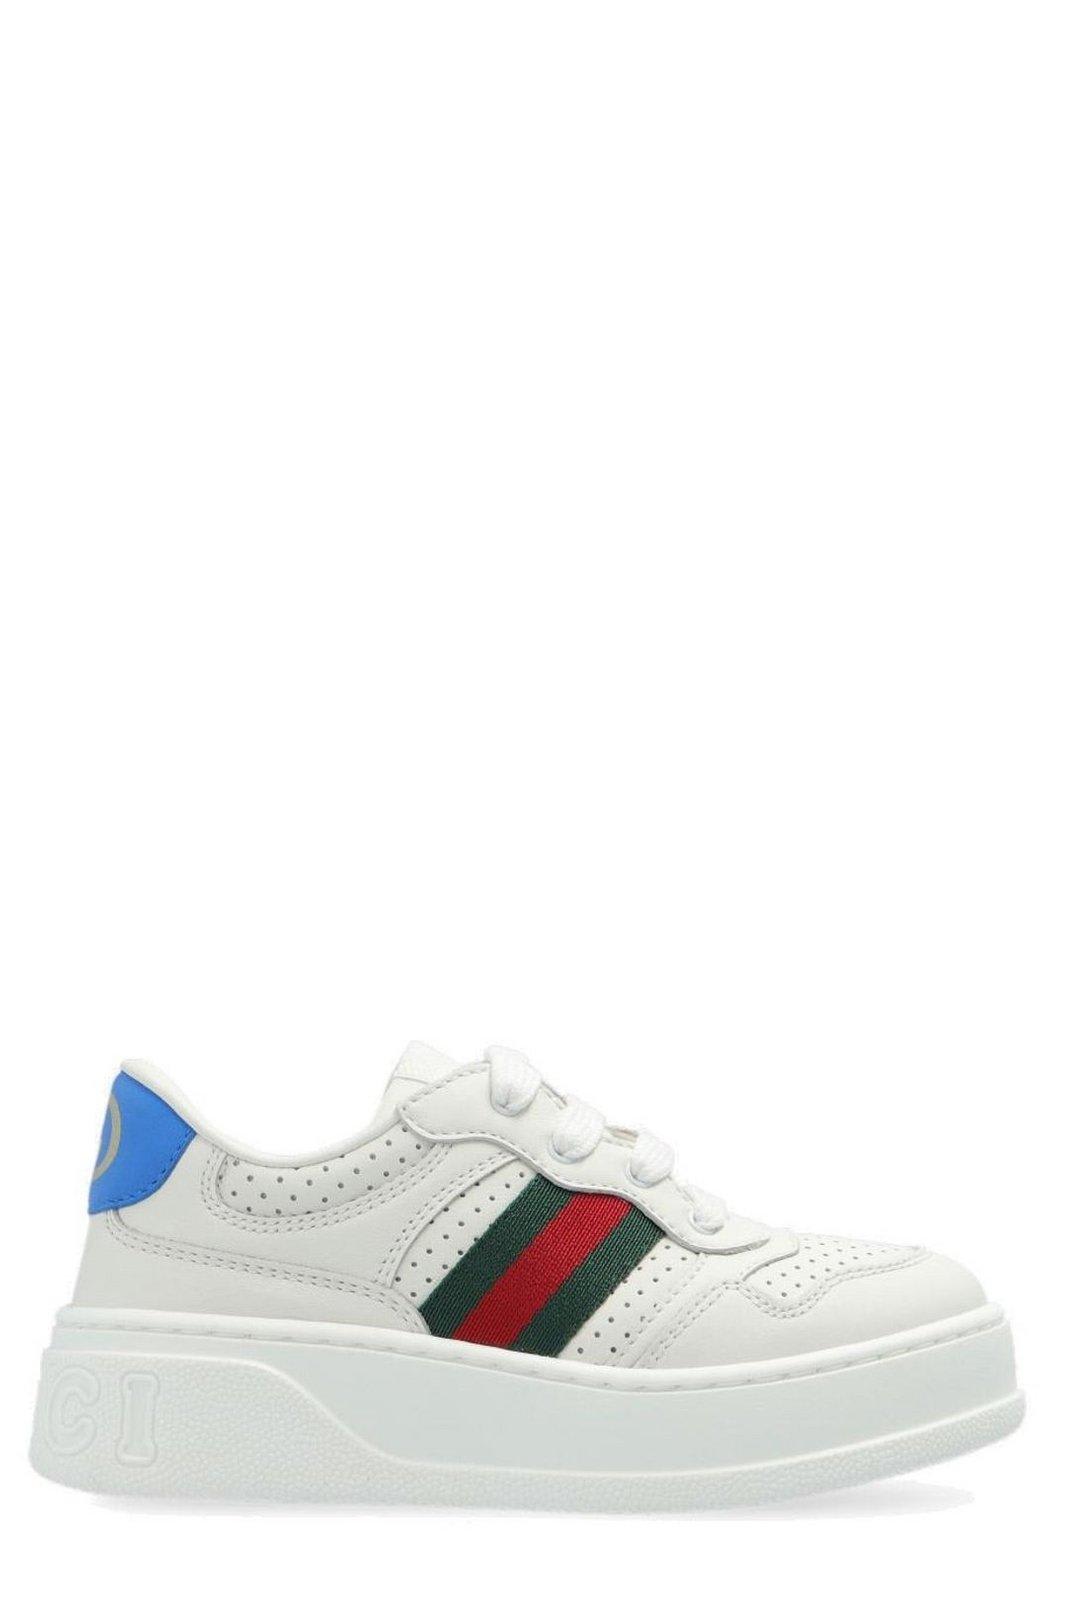 Gucci Round Toe Chunky Sneakers